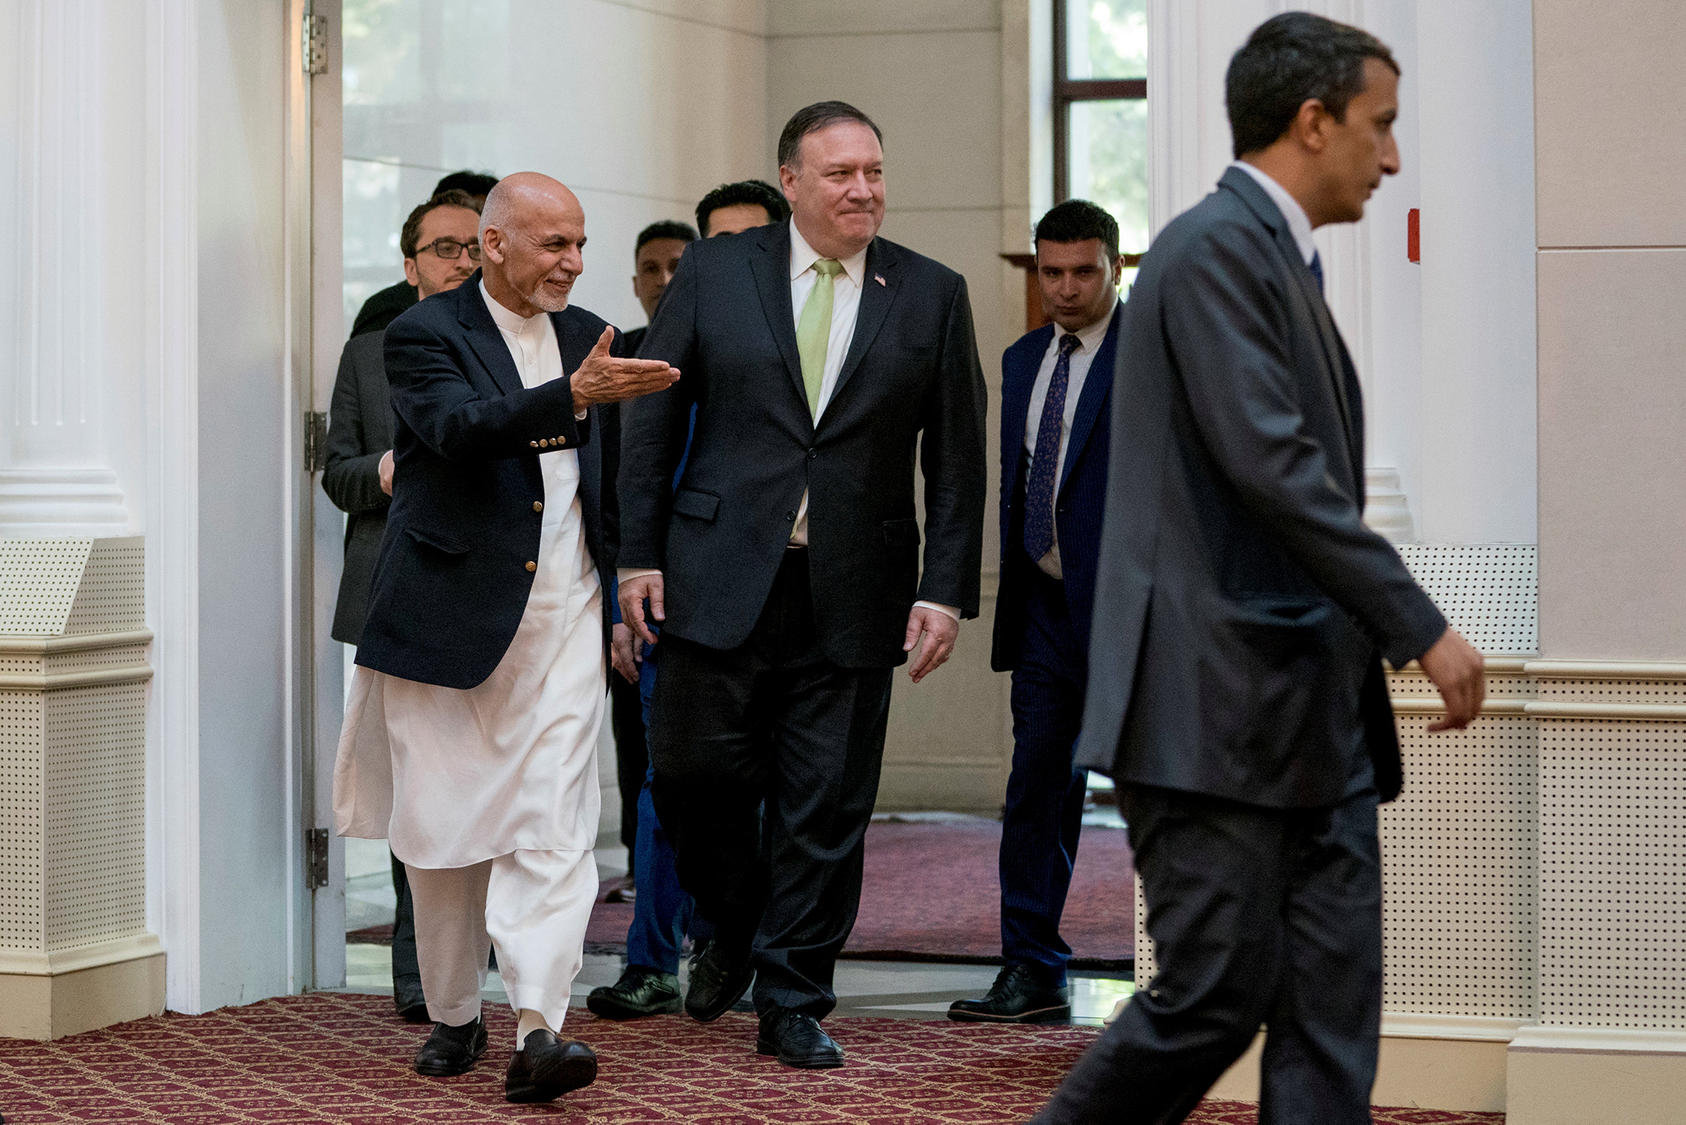 Afghan President Ashraf Ghani, left, accompanied by U.S. Secretary of State Mike Pompeo, at the presidential palace in Kabul, Afghanistan, July 9, 2018.